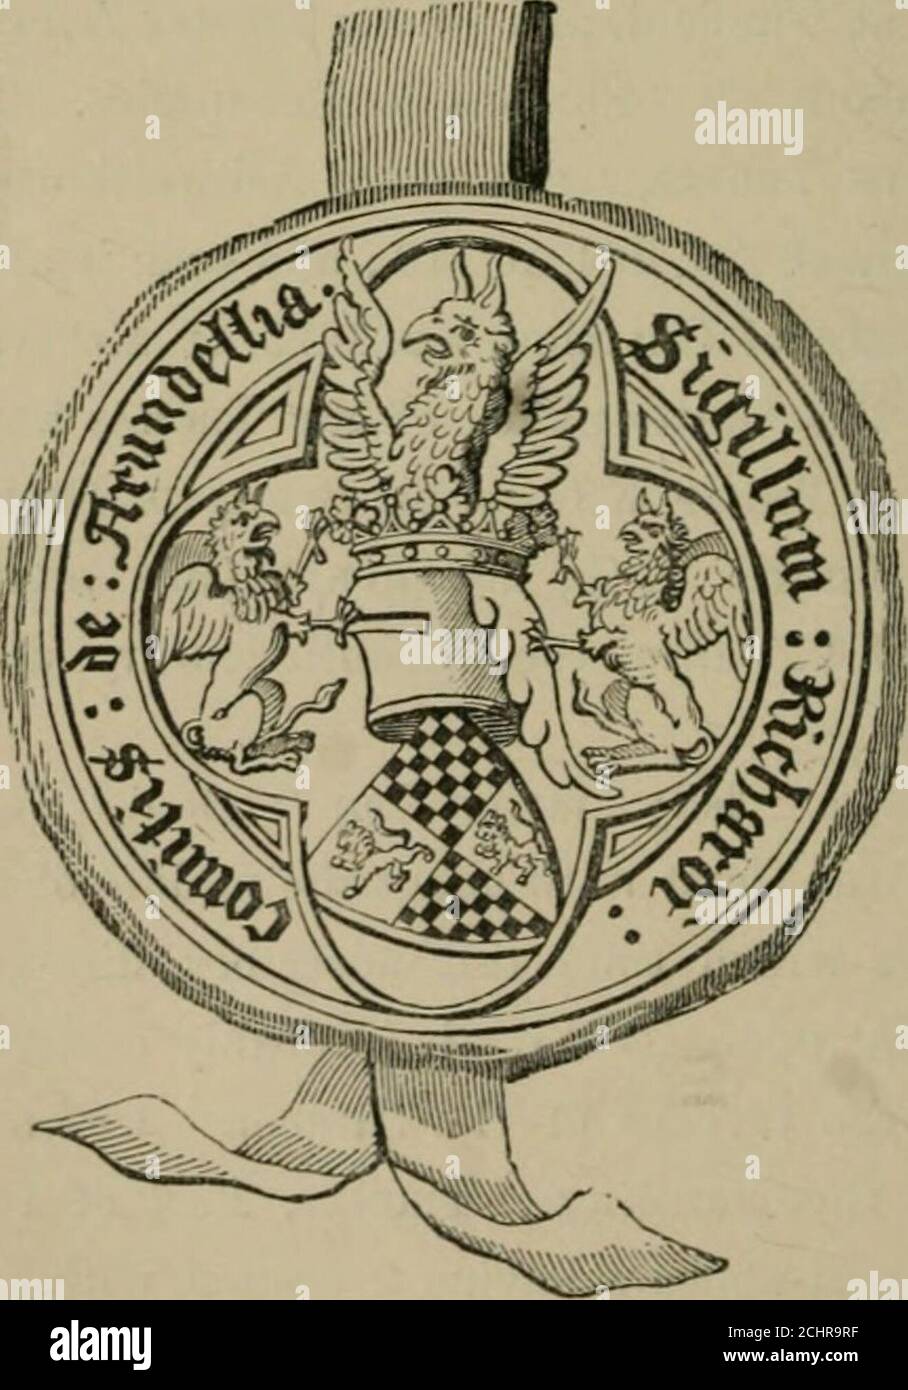 . Heraldry, historical and popular . e head of his charger,Xo. 524, PL XXXV.: and the seal of Ealph de Monthermer,Earl of Gloucester, a.d. 1323, has on his hebn an eagle-crest .D. V- C^.t^ ,ftw«^&lt;4,^tatr.XVU A^, 268 BADGES, CRESTS, SUPPORTERS, and a contoise. This eagle-crest was a special grant fromEdward III. to William de Montacute. In Achievements ofArms, and particularly in such as are blazoned on Seals, thegioup is arranged in the manner represented in No. 301, PI. I.,the Supporters being added on either side as in No. 707 A. TheCrests in these compositions of the fourteenth and fifte Stock Photo